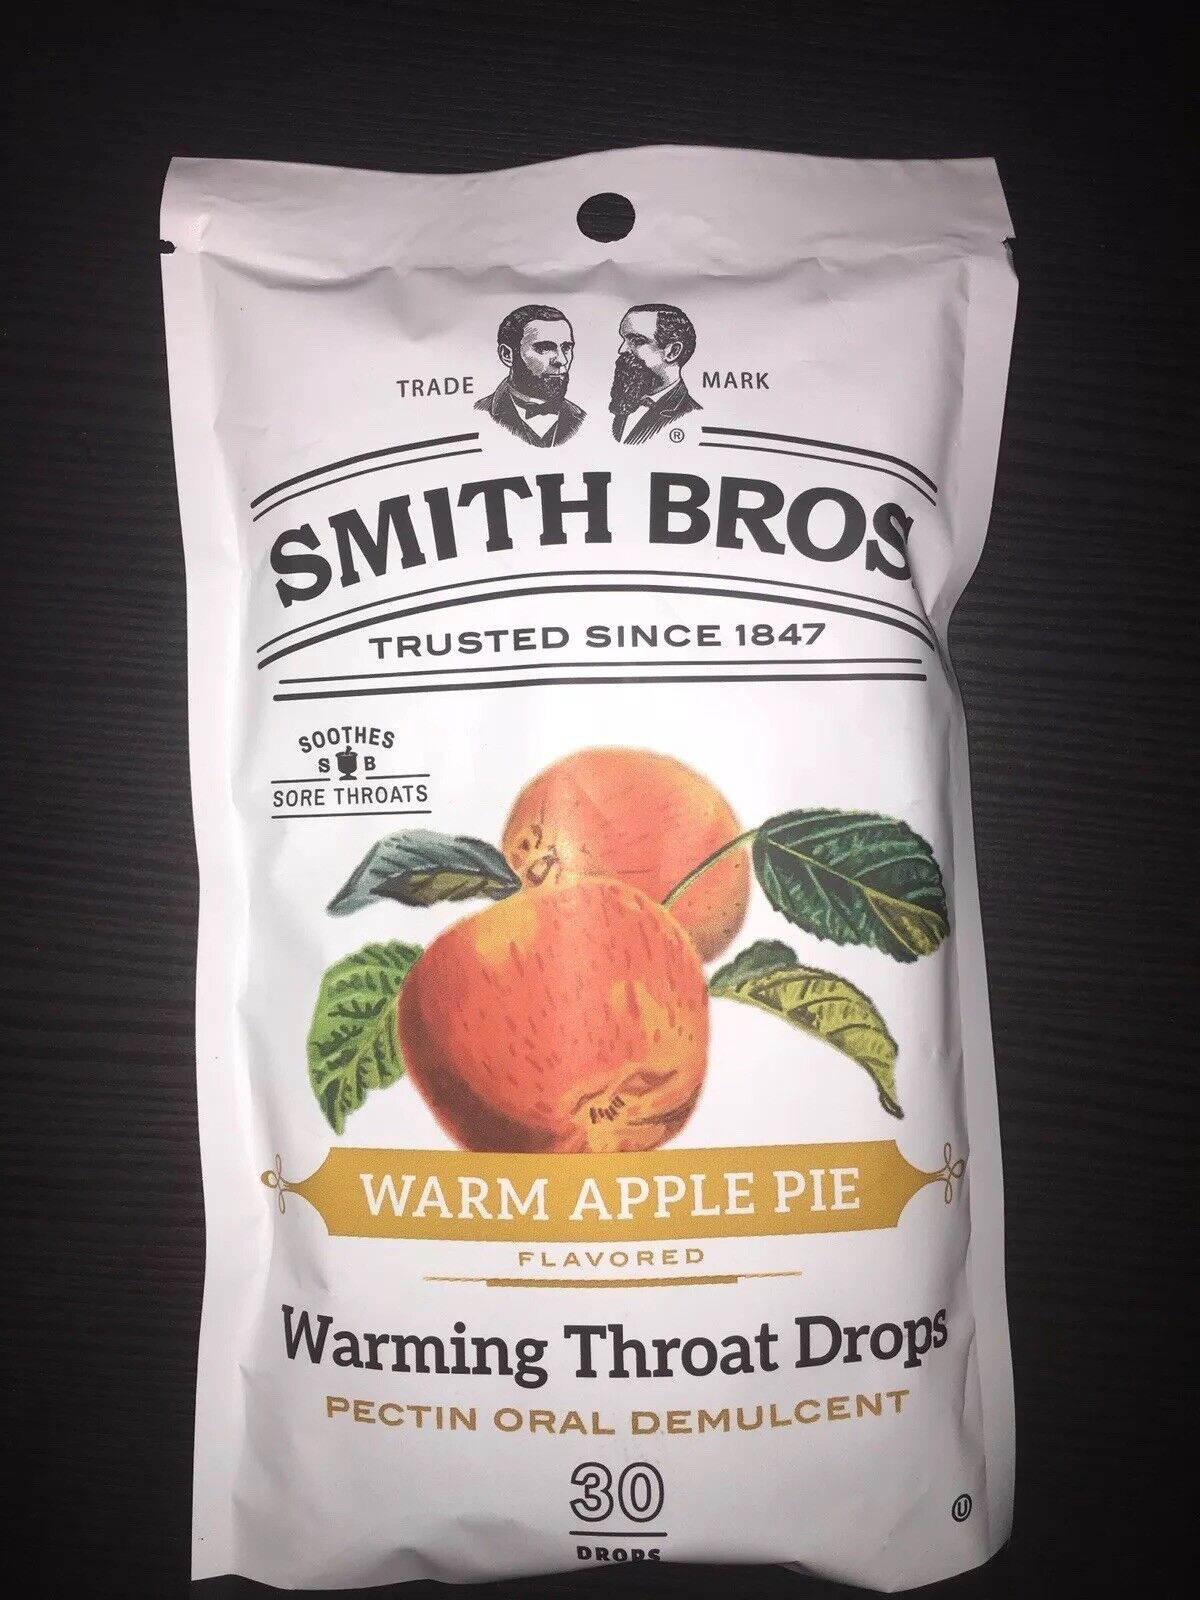 120 Cough Drops Smith Bros Brothers Warm Apple Pie (4) 30 Count Bags Exp 6/20 Без бренда - фотография #2